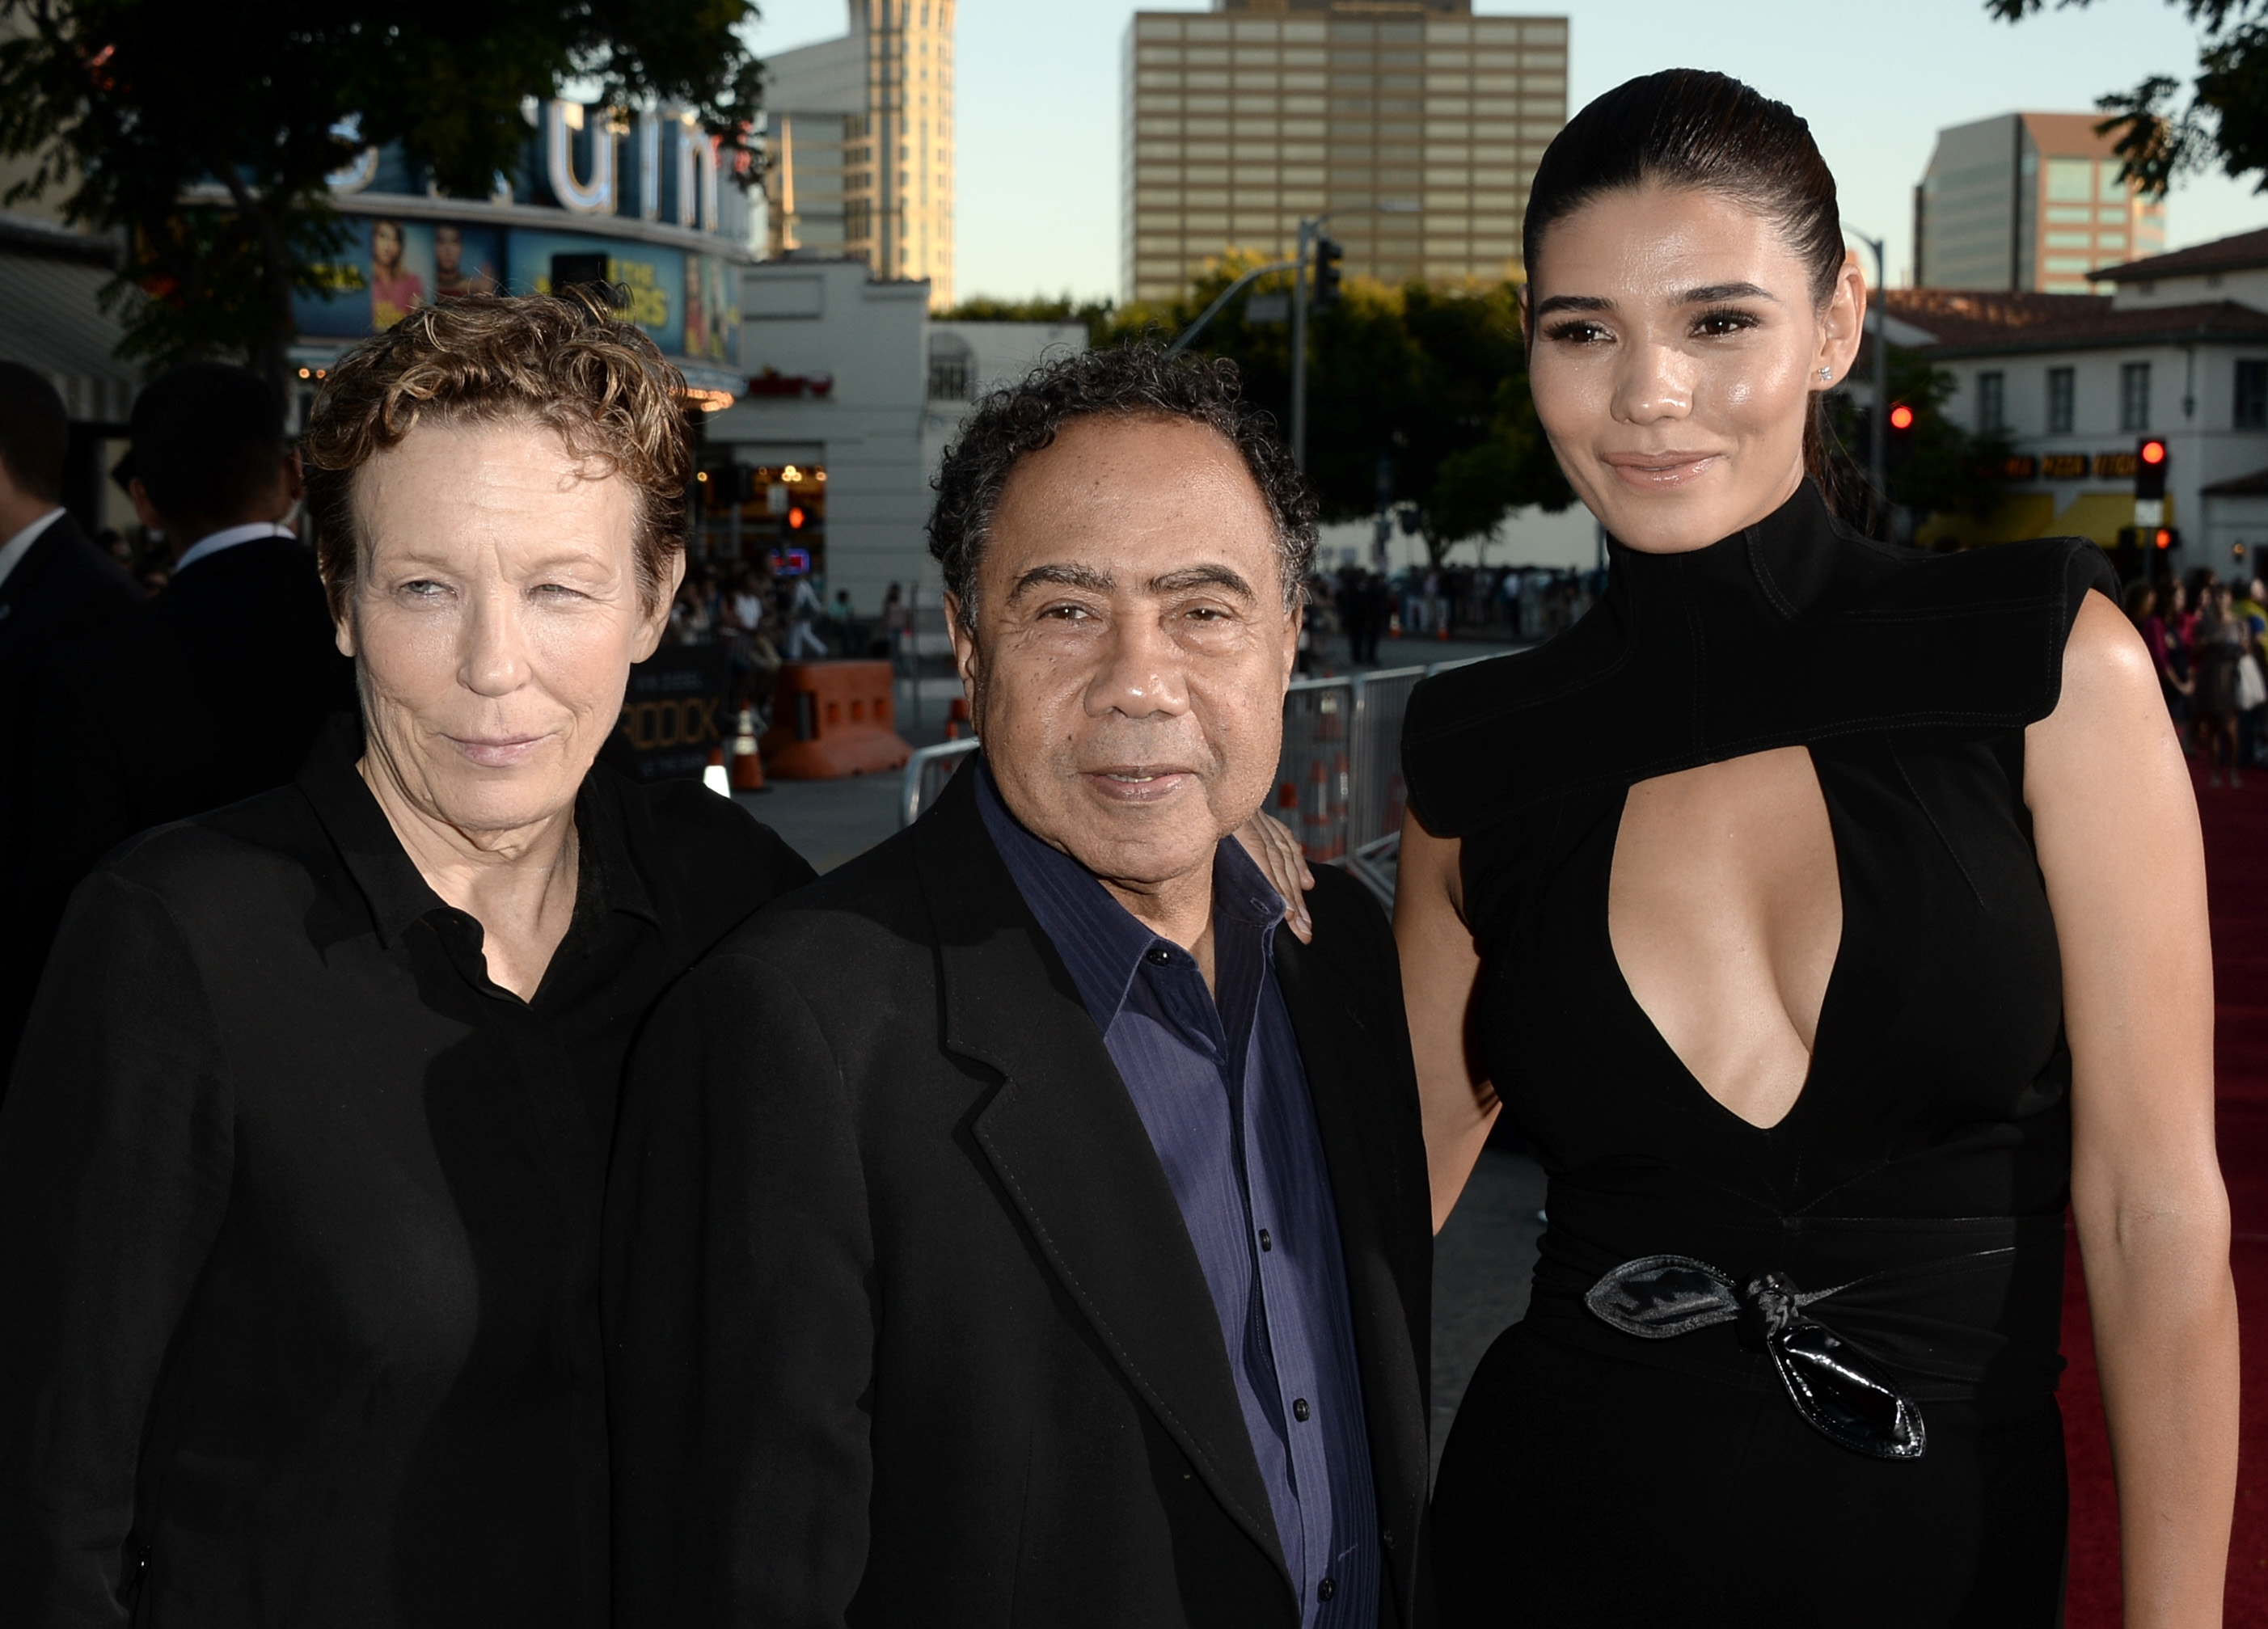 Delora Vincent, Irving Vincent and Paloma Jimenez at the premiere of "Riddick" in 2013, in Westwood, California. | Source: Getty Images